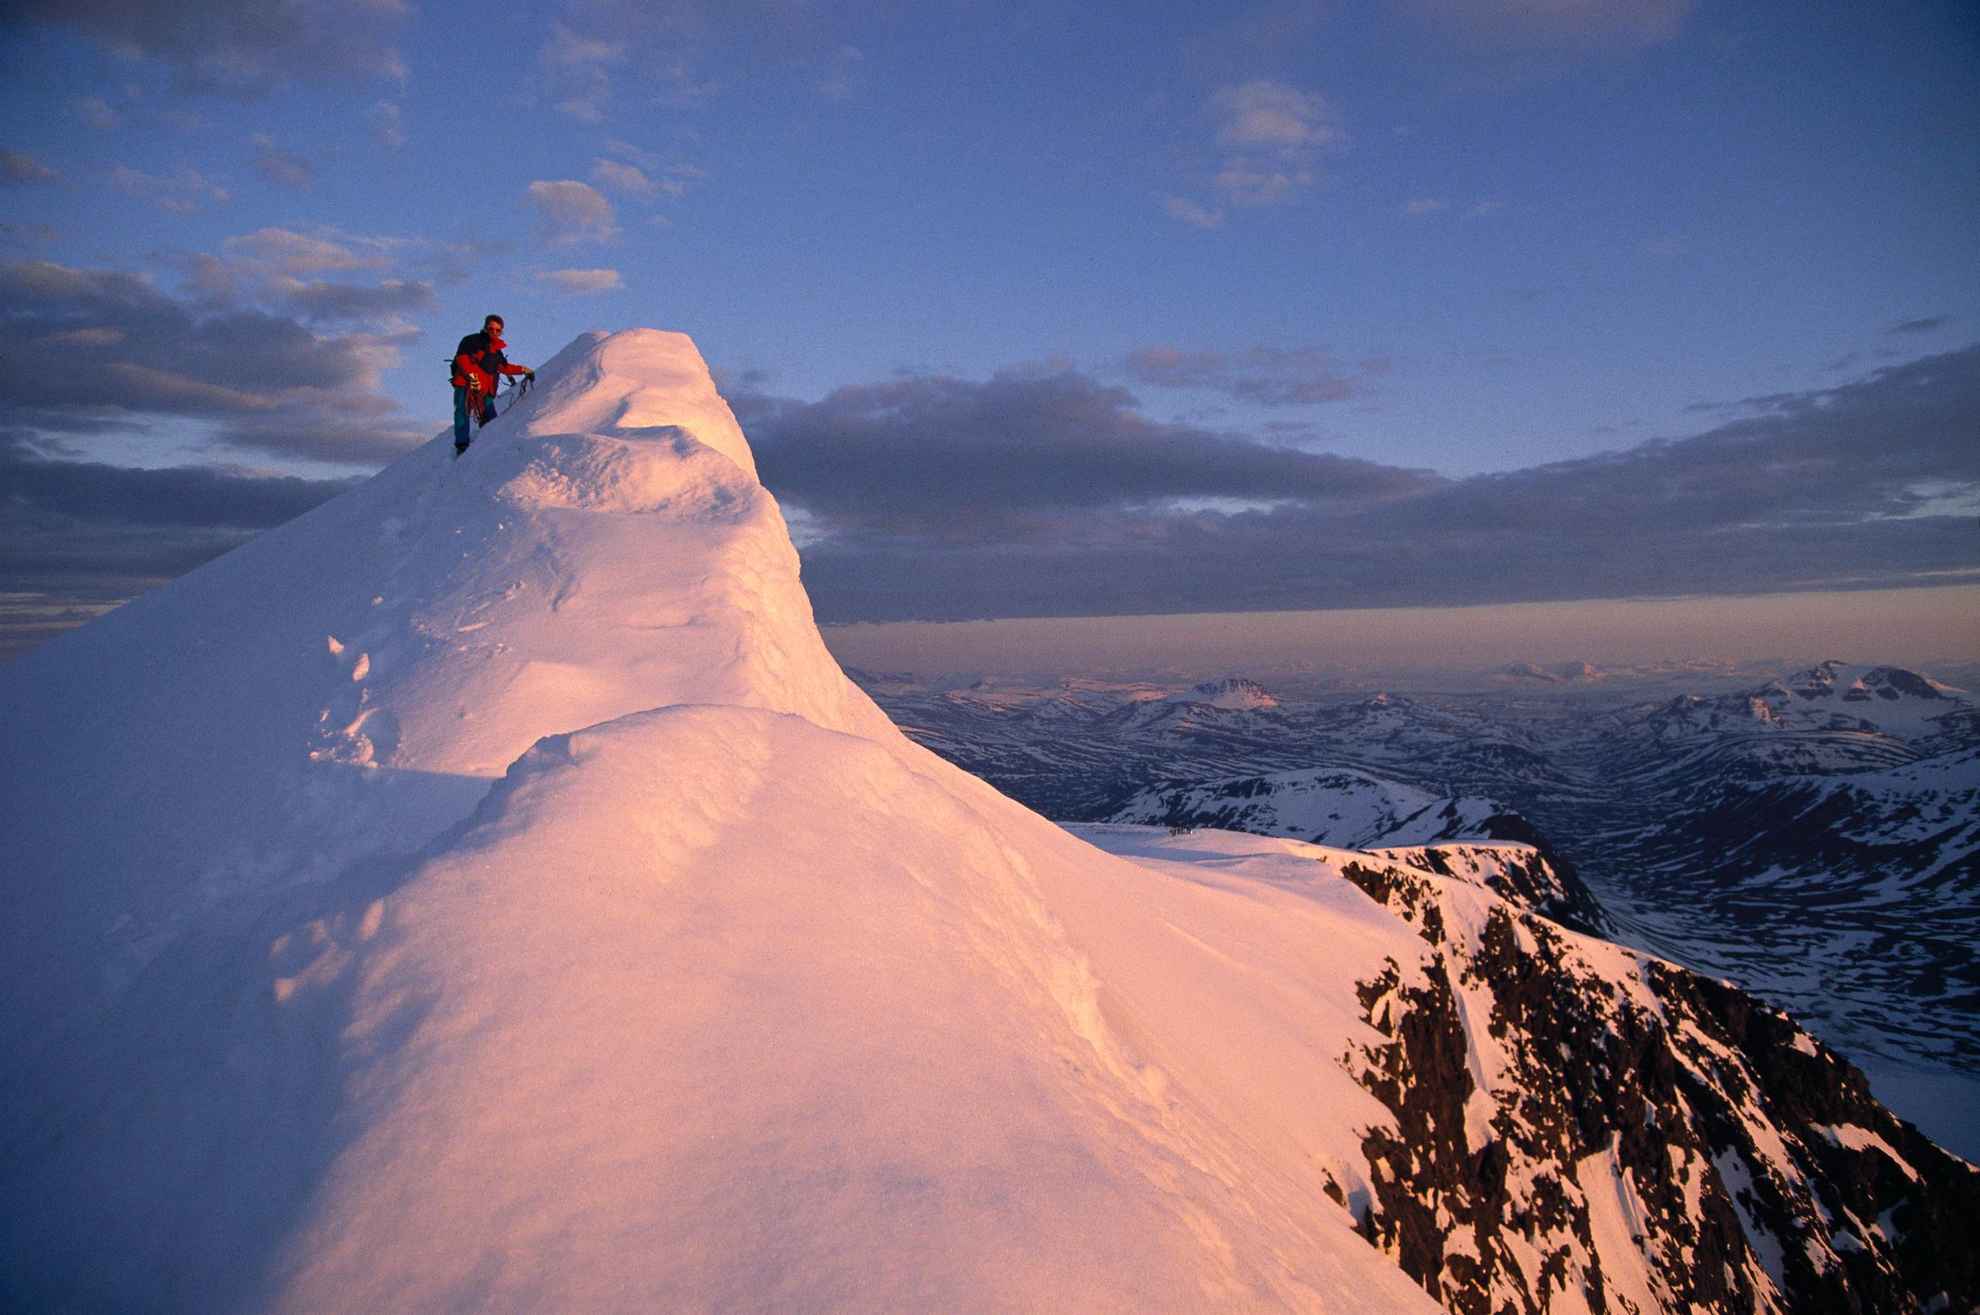 A person stands on top of a snowy mountain.